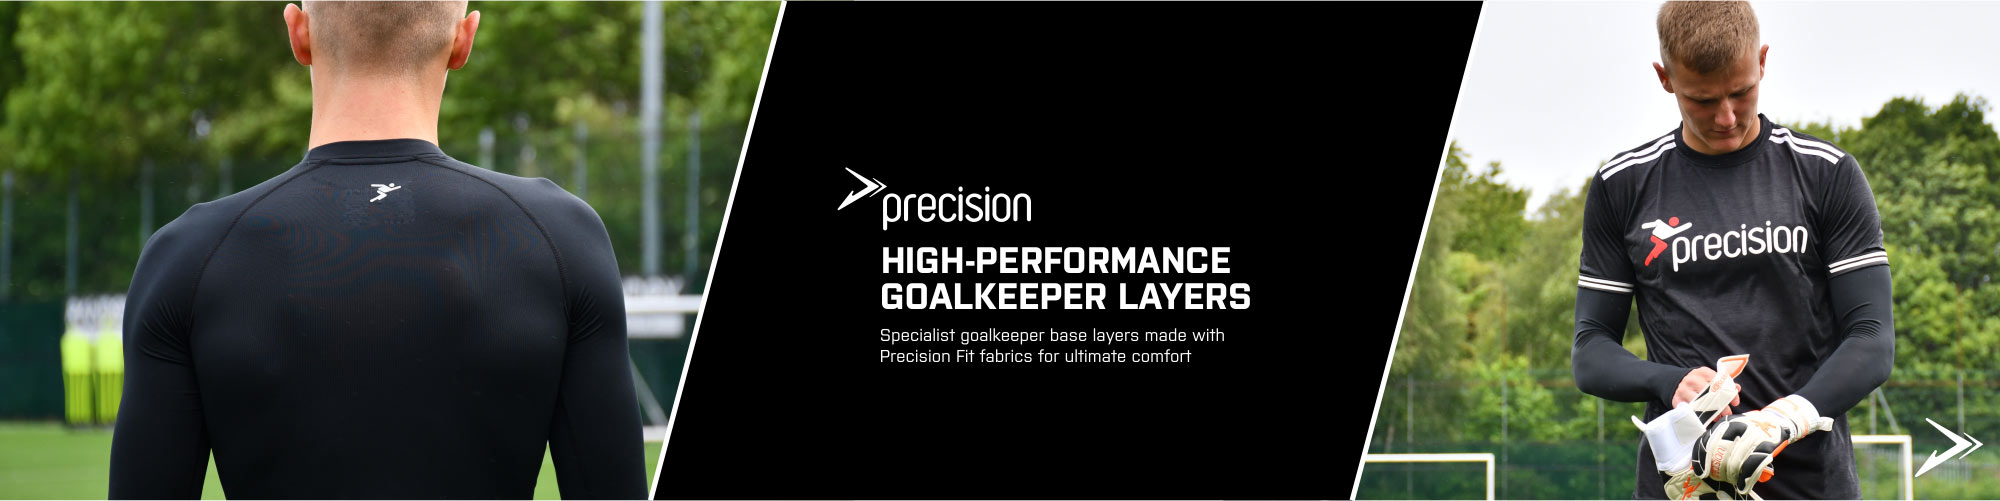 Precision Just Keepers Goalkeeper Gloves UK store